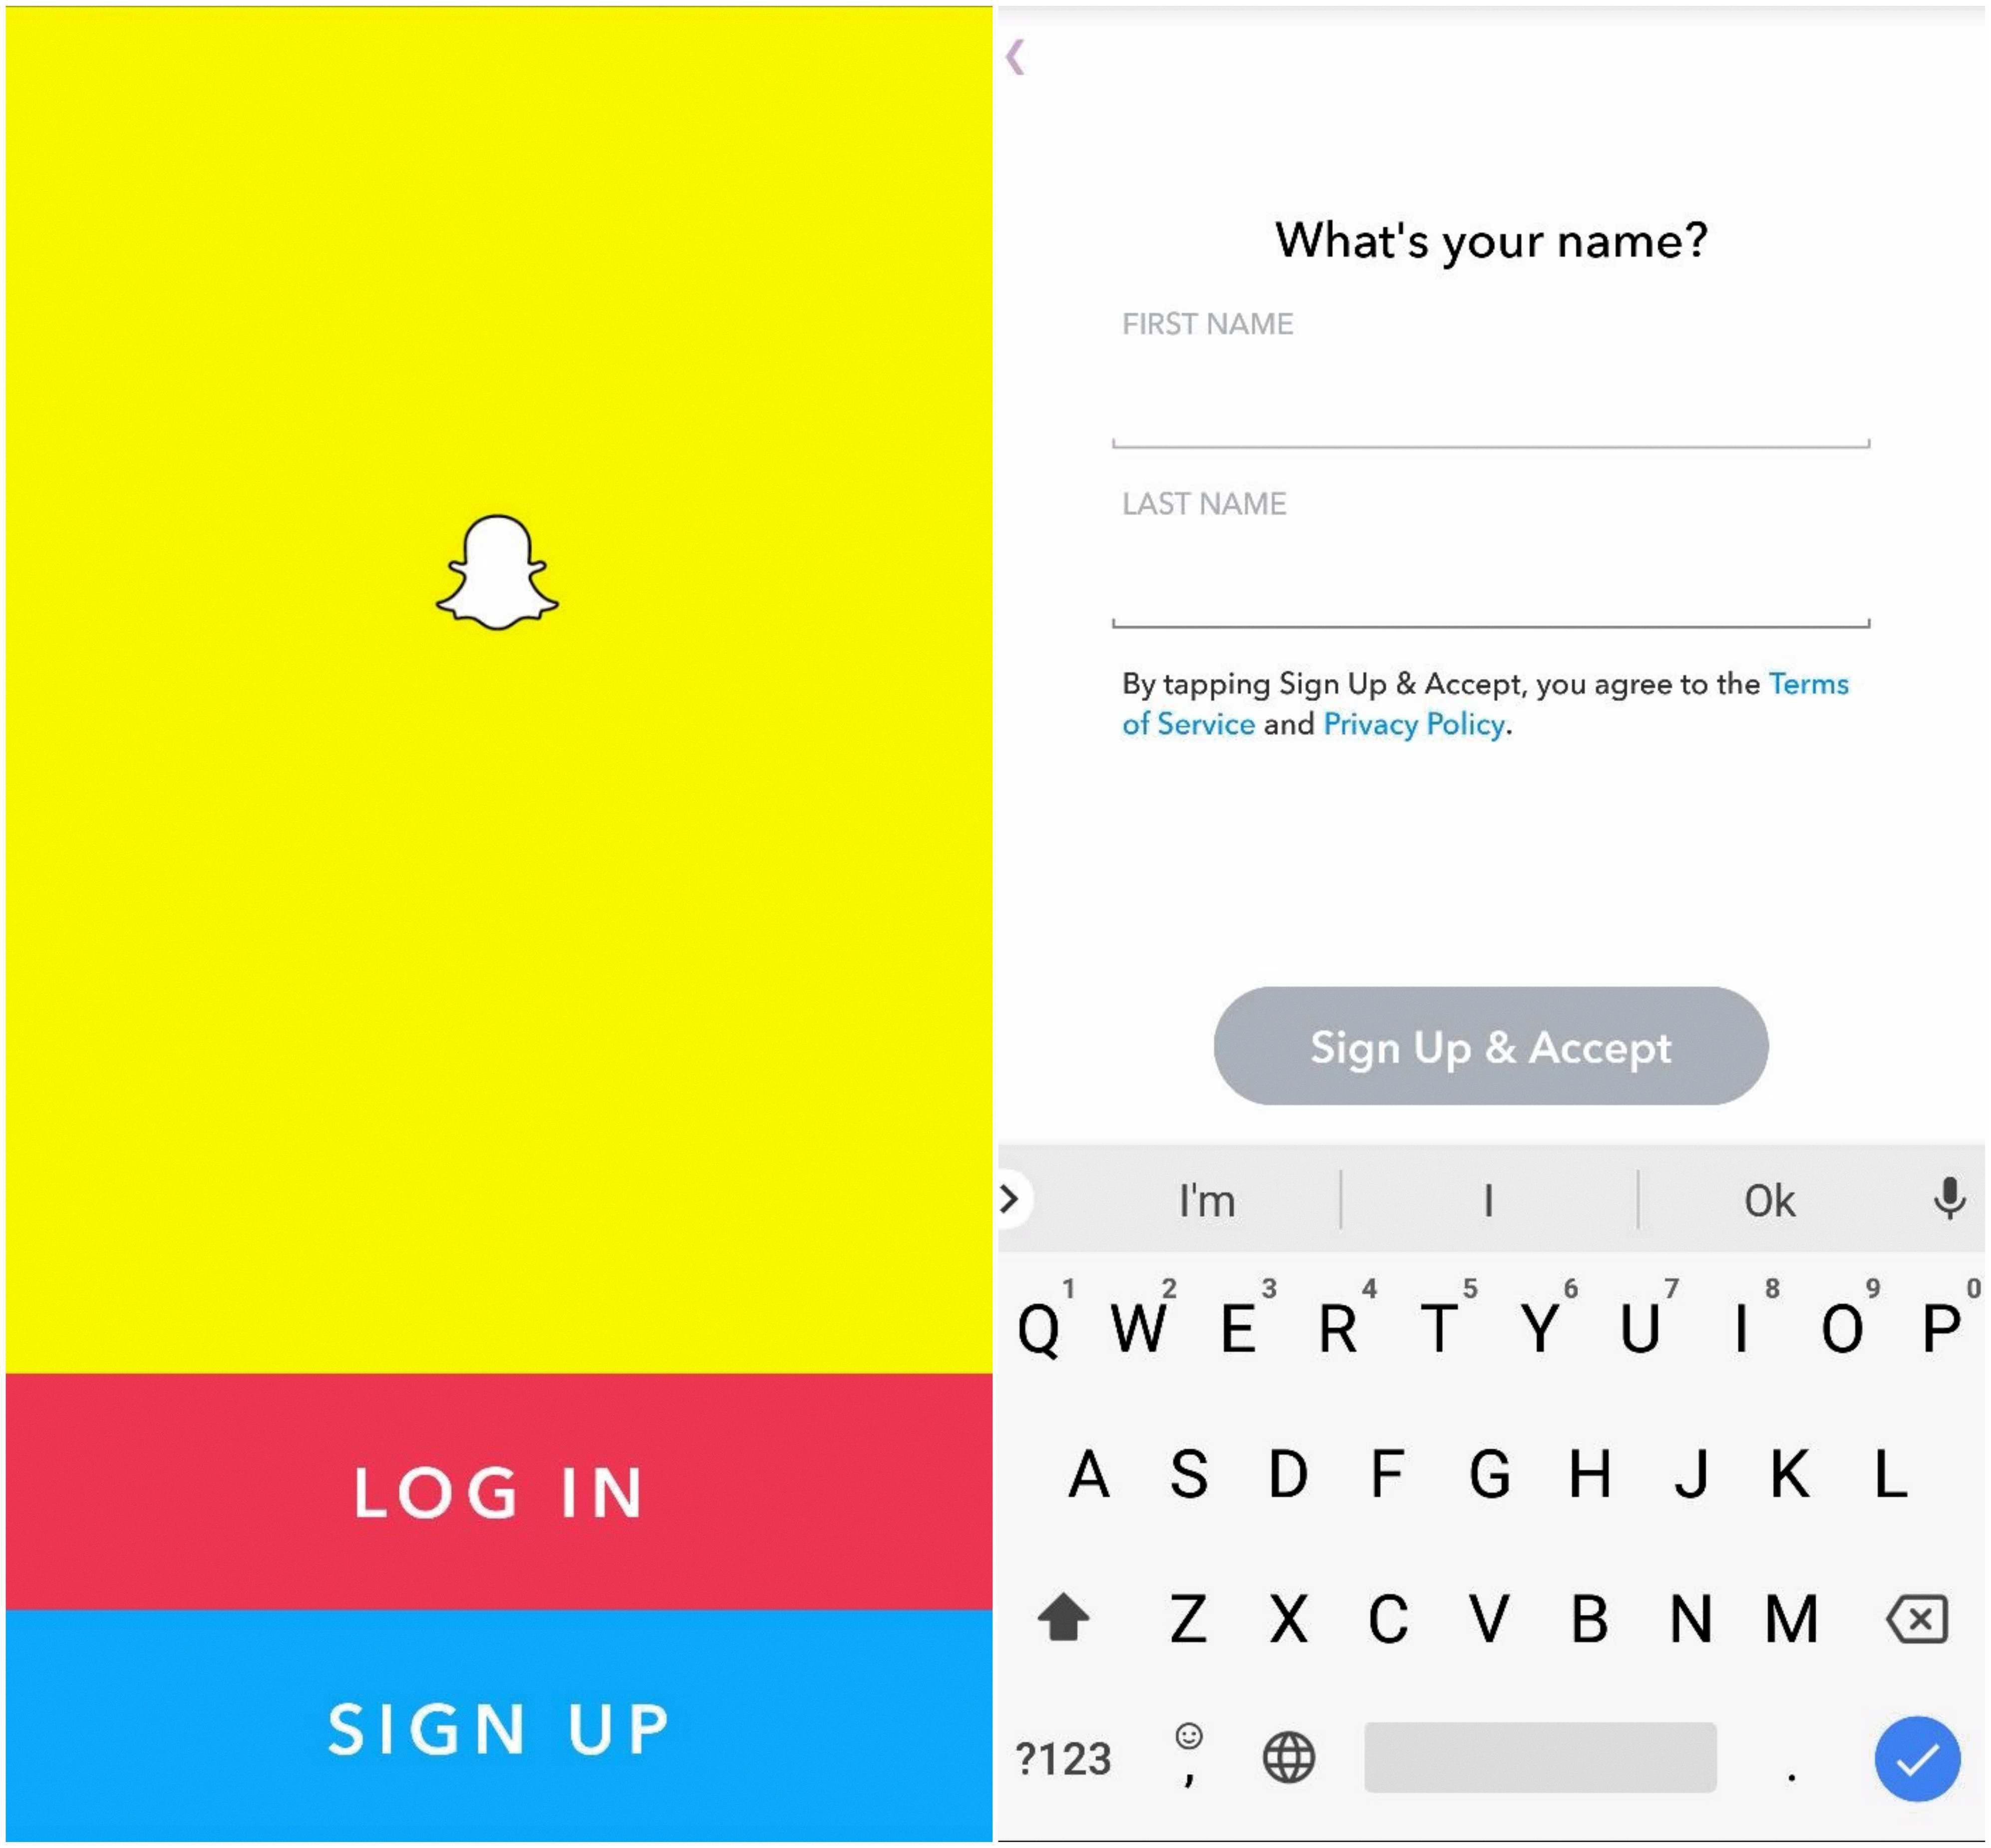 How to Set Up Your Account on Snapchat? 9